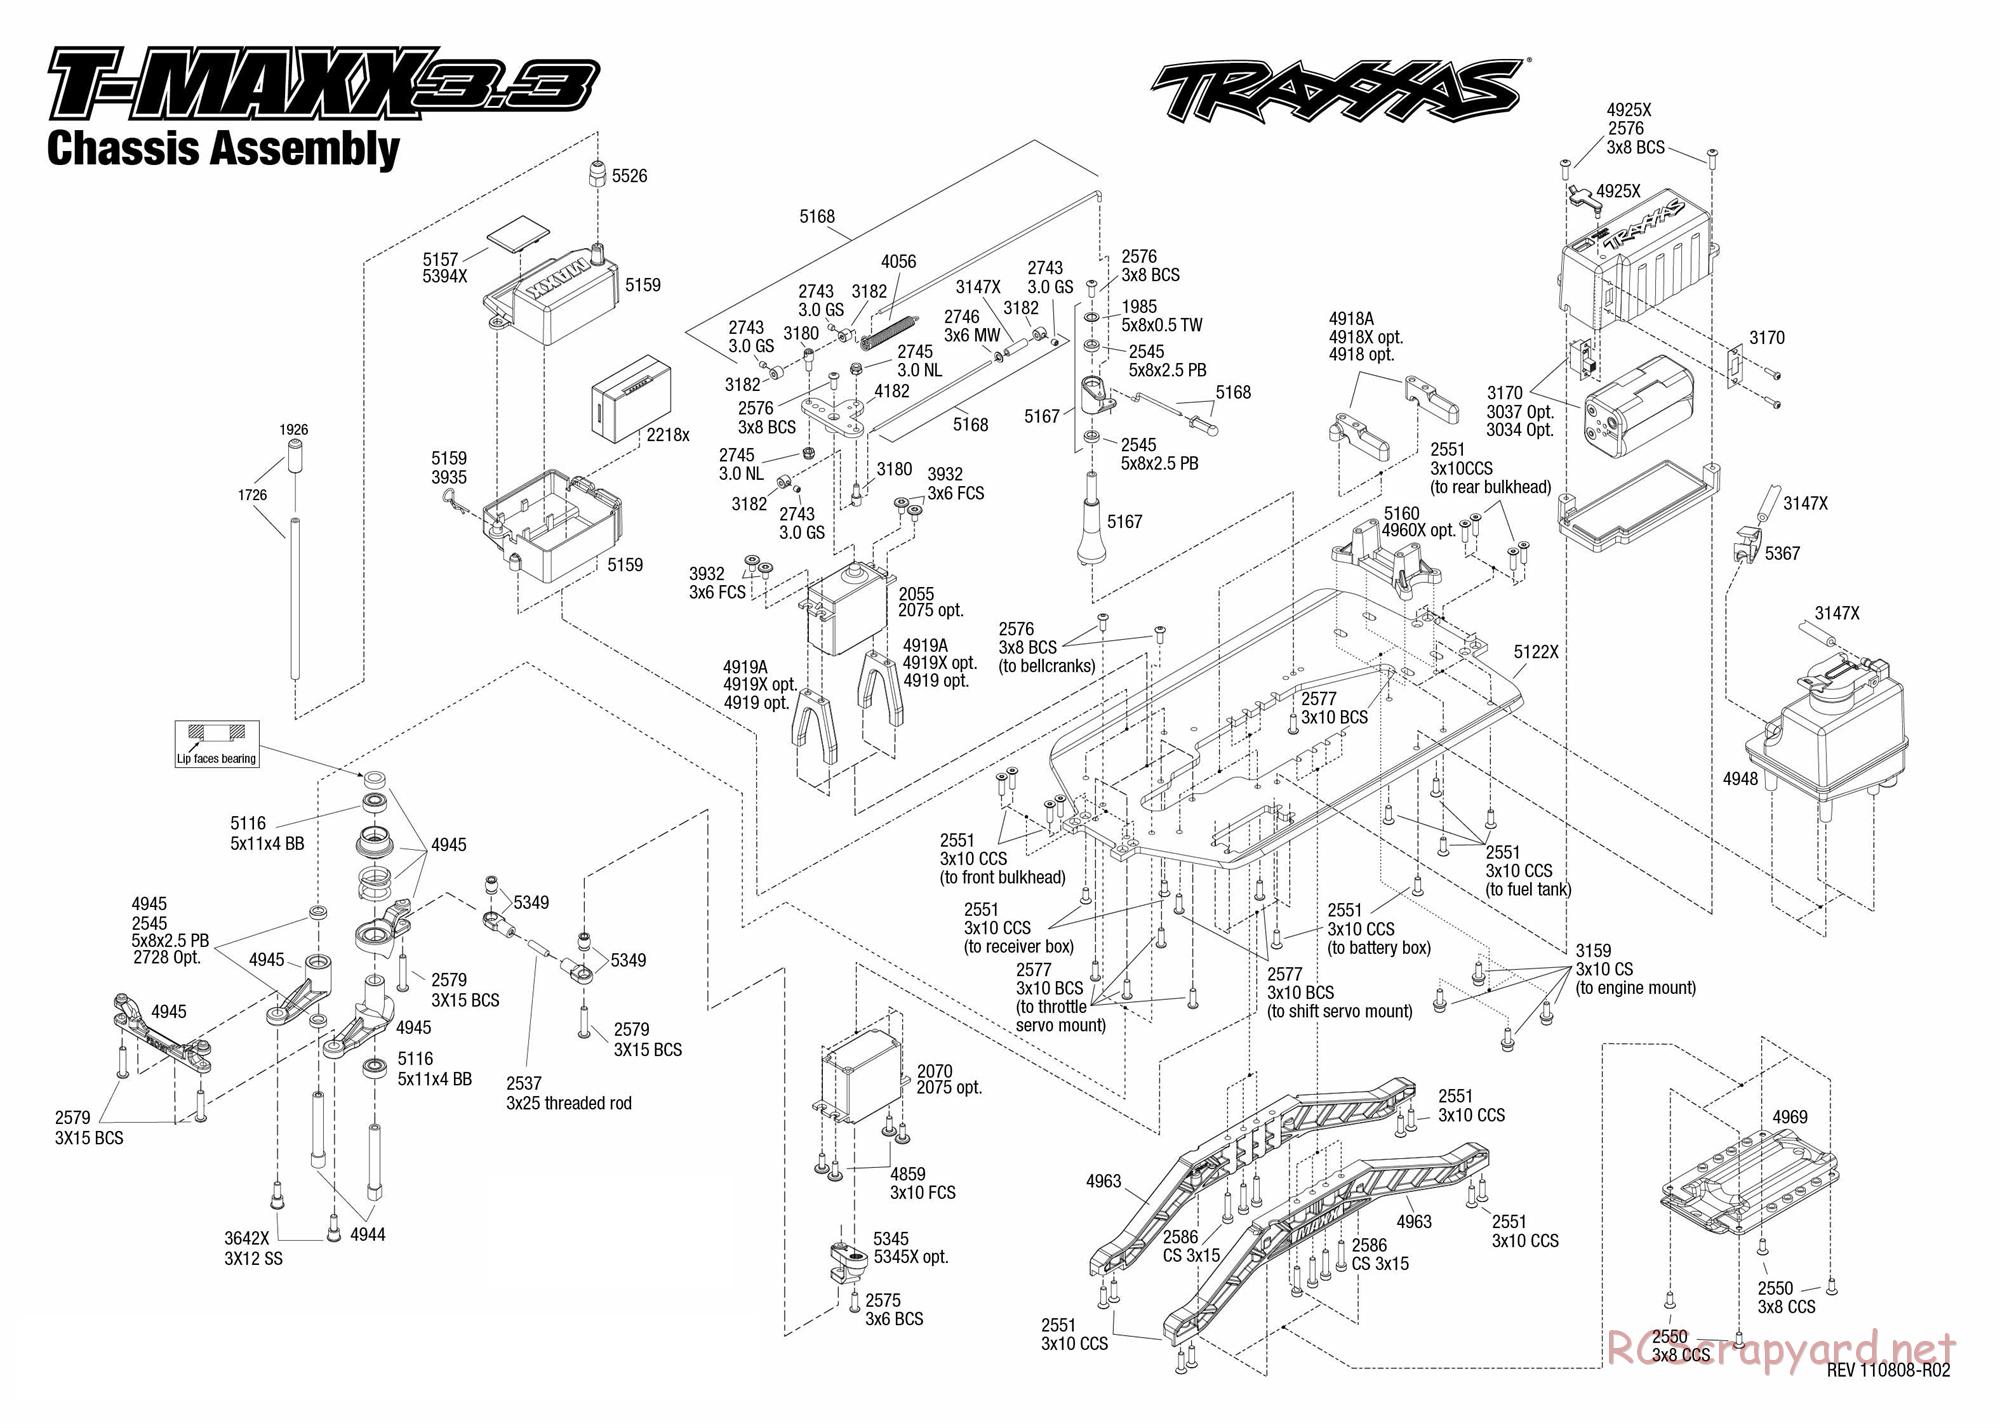 Traxxas - T-Maxx 3.3 (2010) - Exploded Views - Page 1